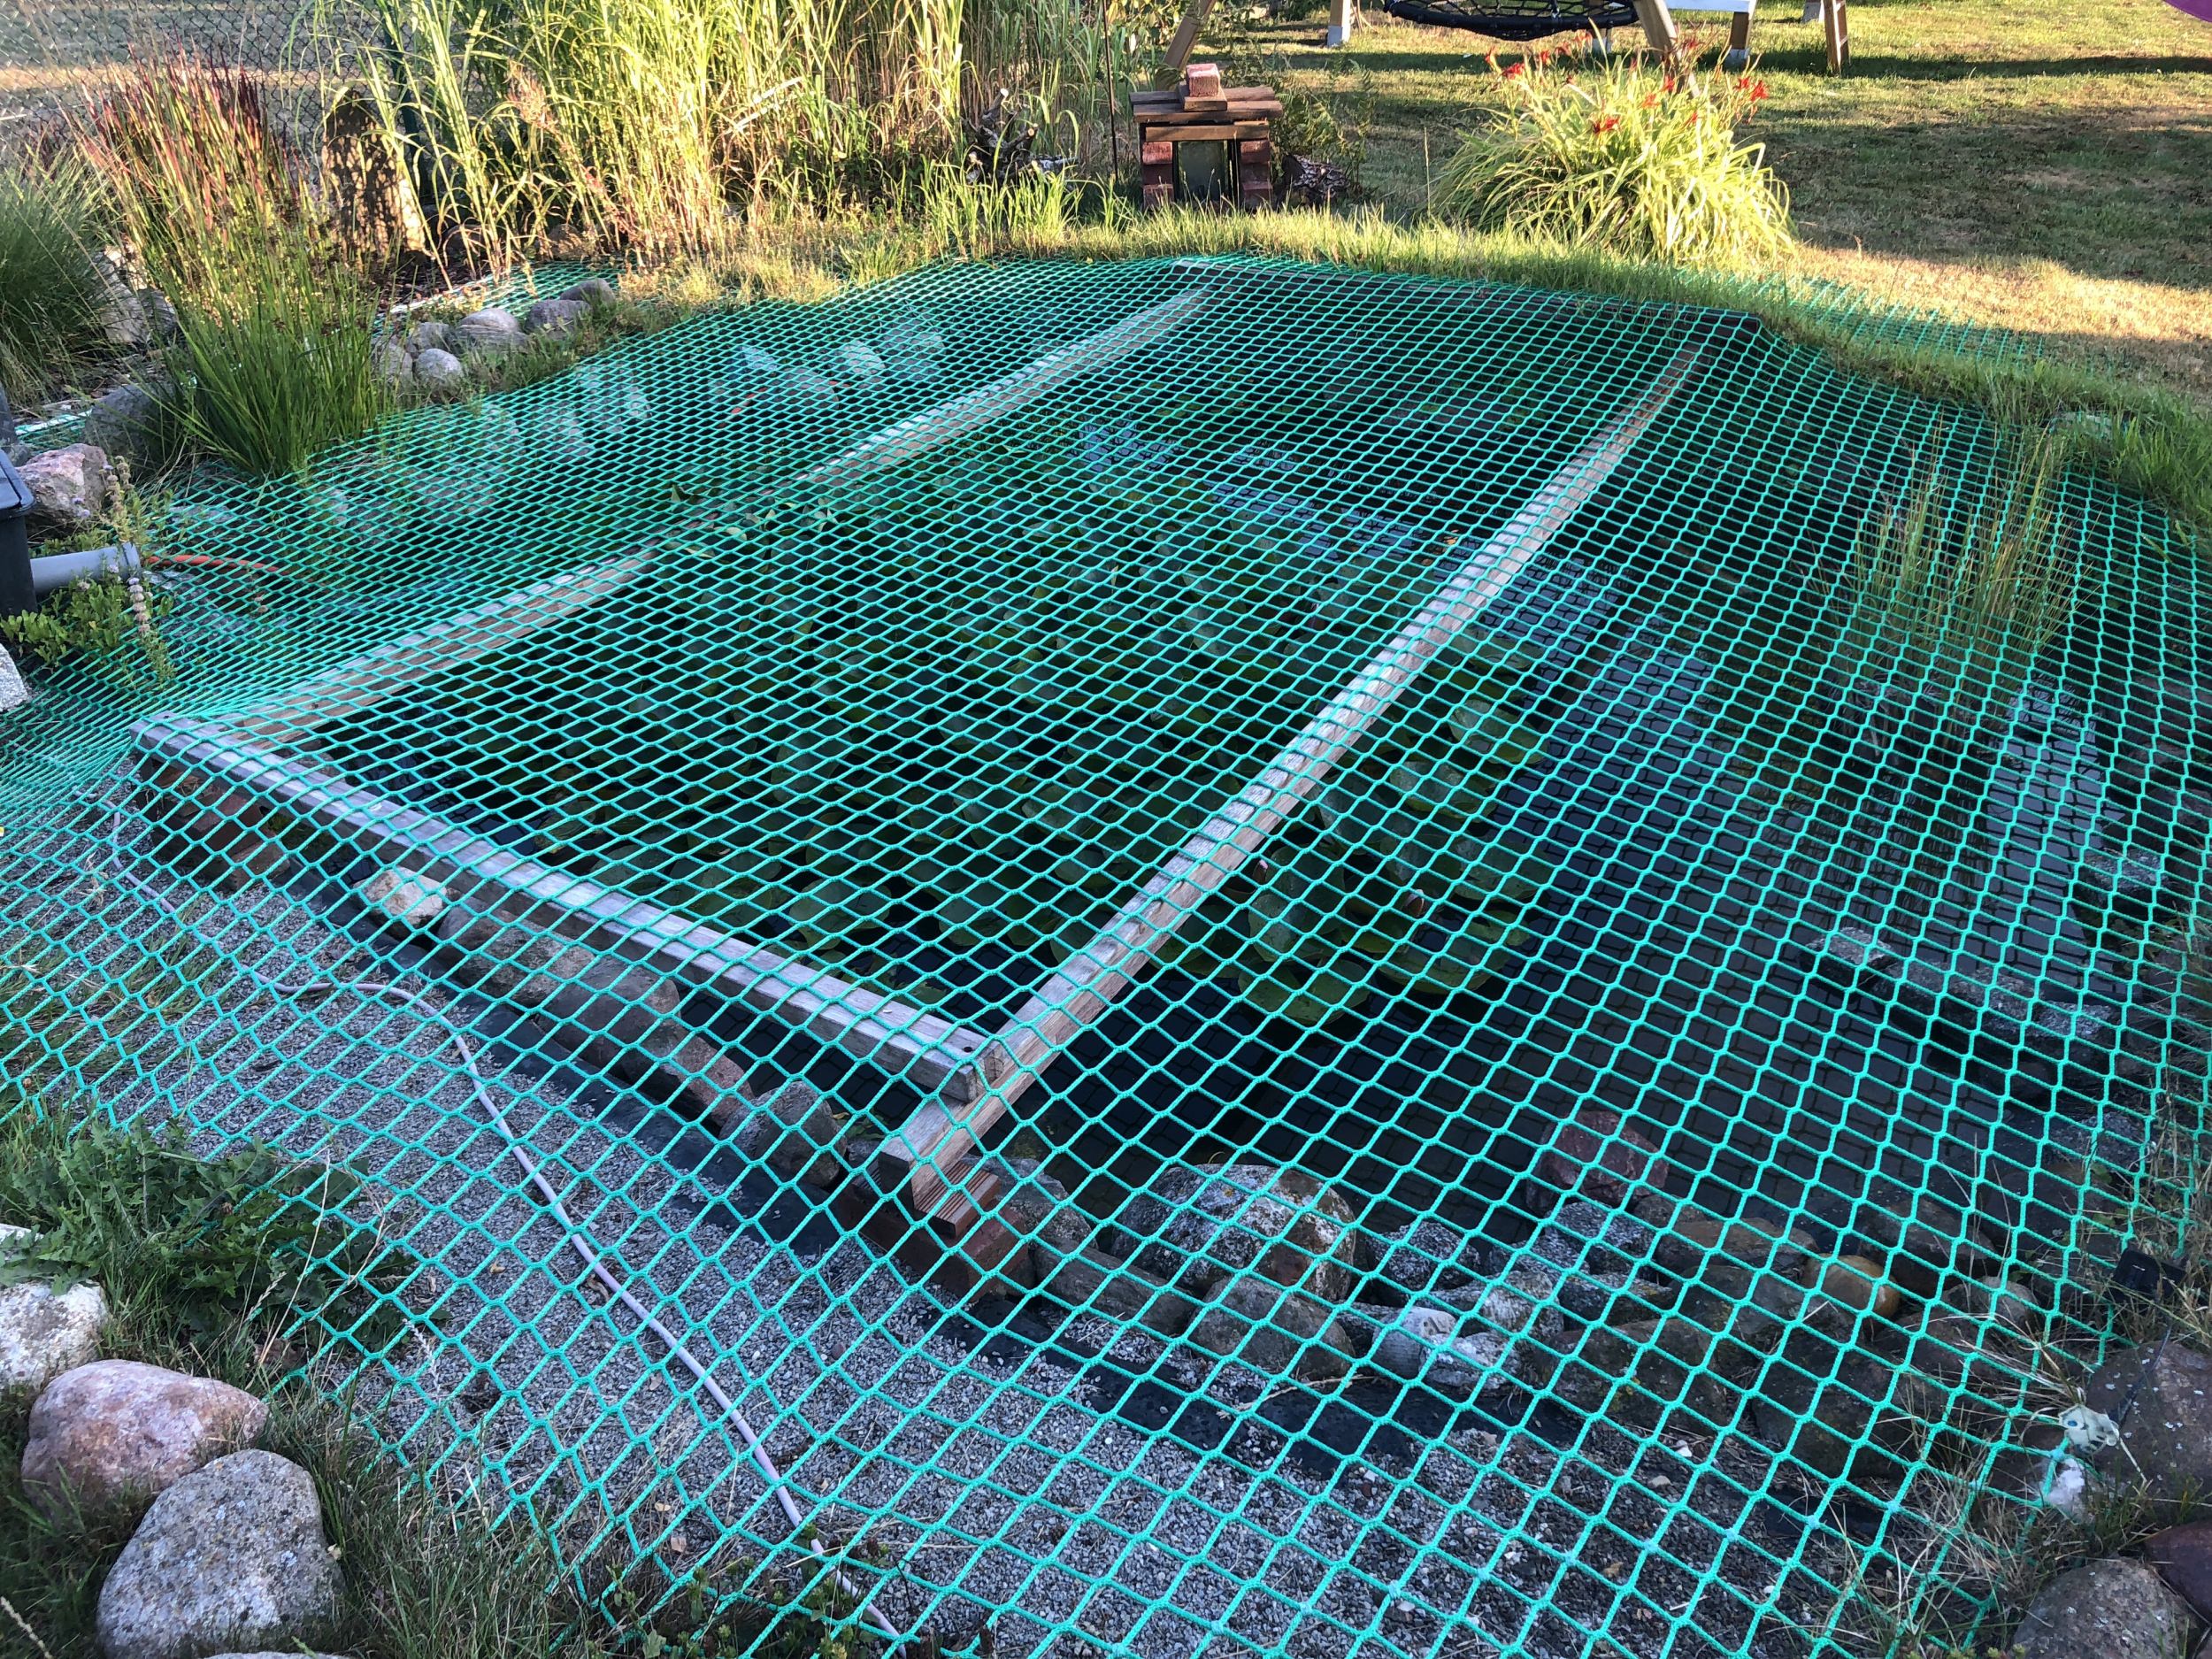 Pond/Pool Cover Nets to Provide Fall Safety for People